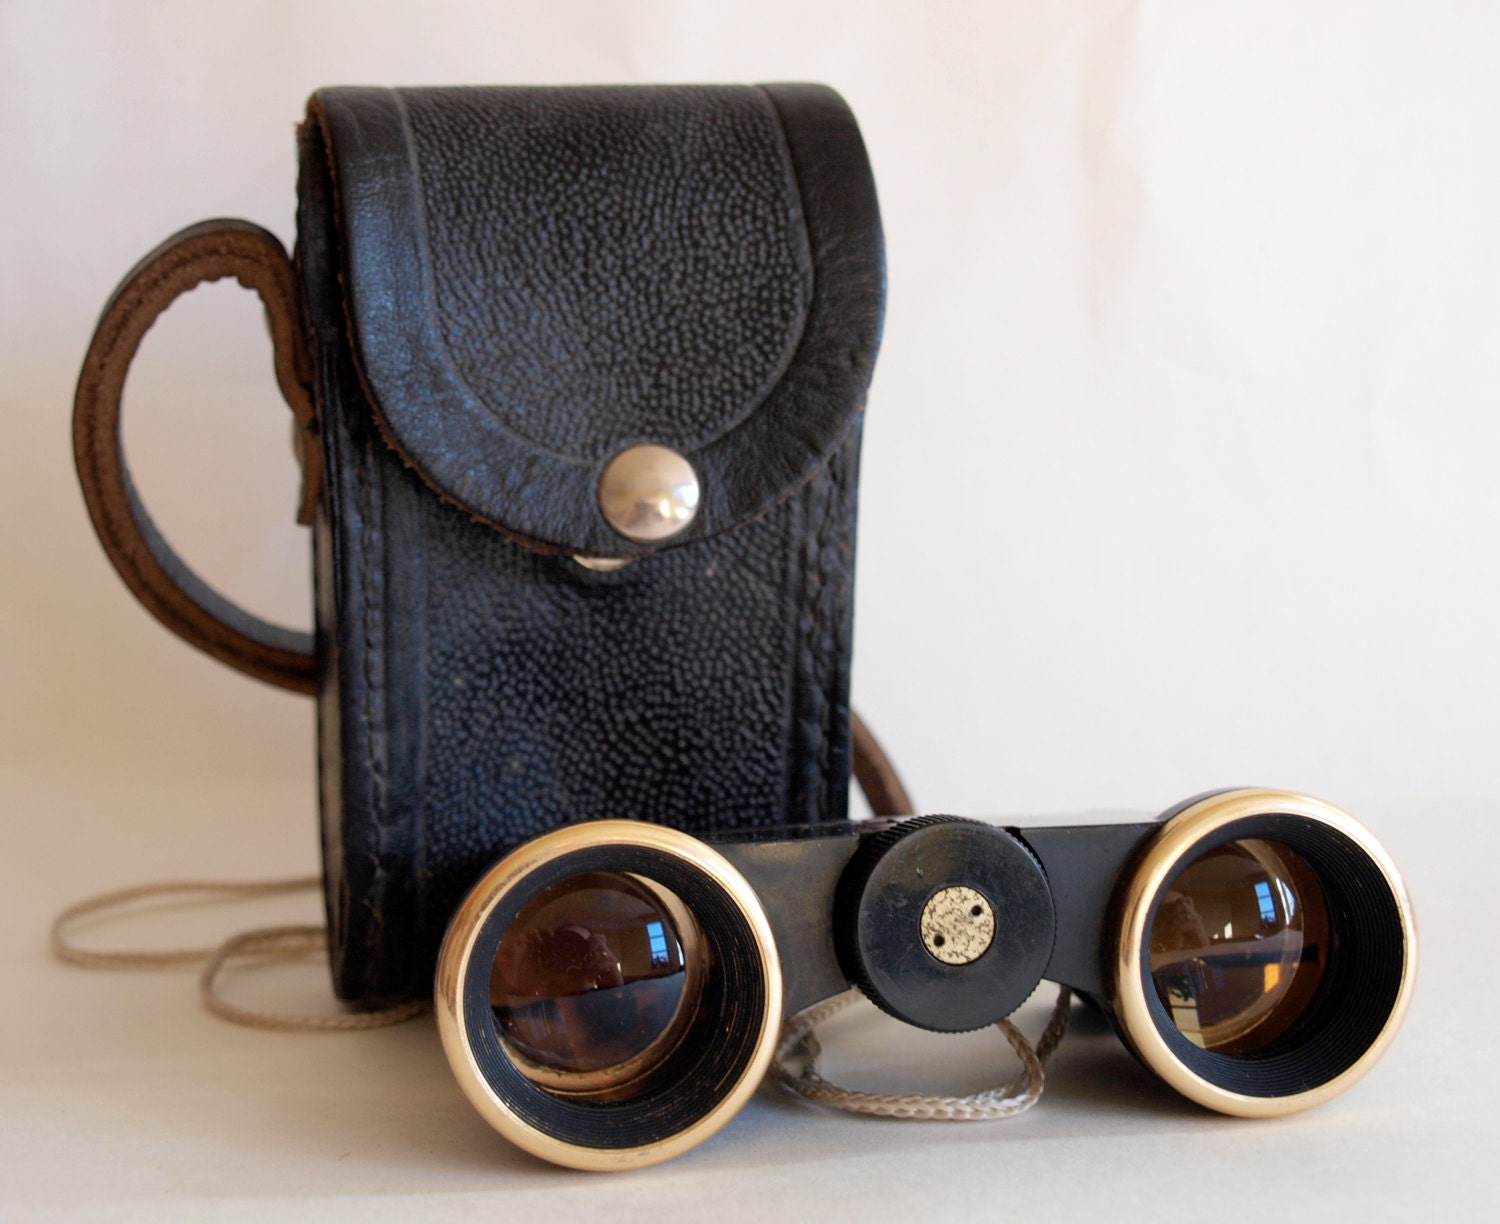 Soviet opera binoculars. Black and gold little chic theatre glasses in black leather case. Made in Soviet Russia, in 1970's - ArnoldsTreasury